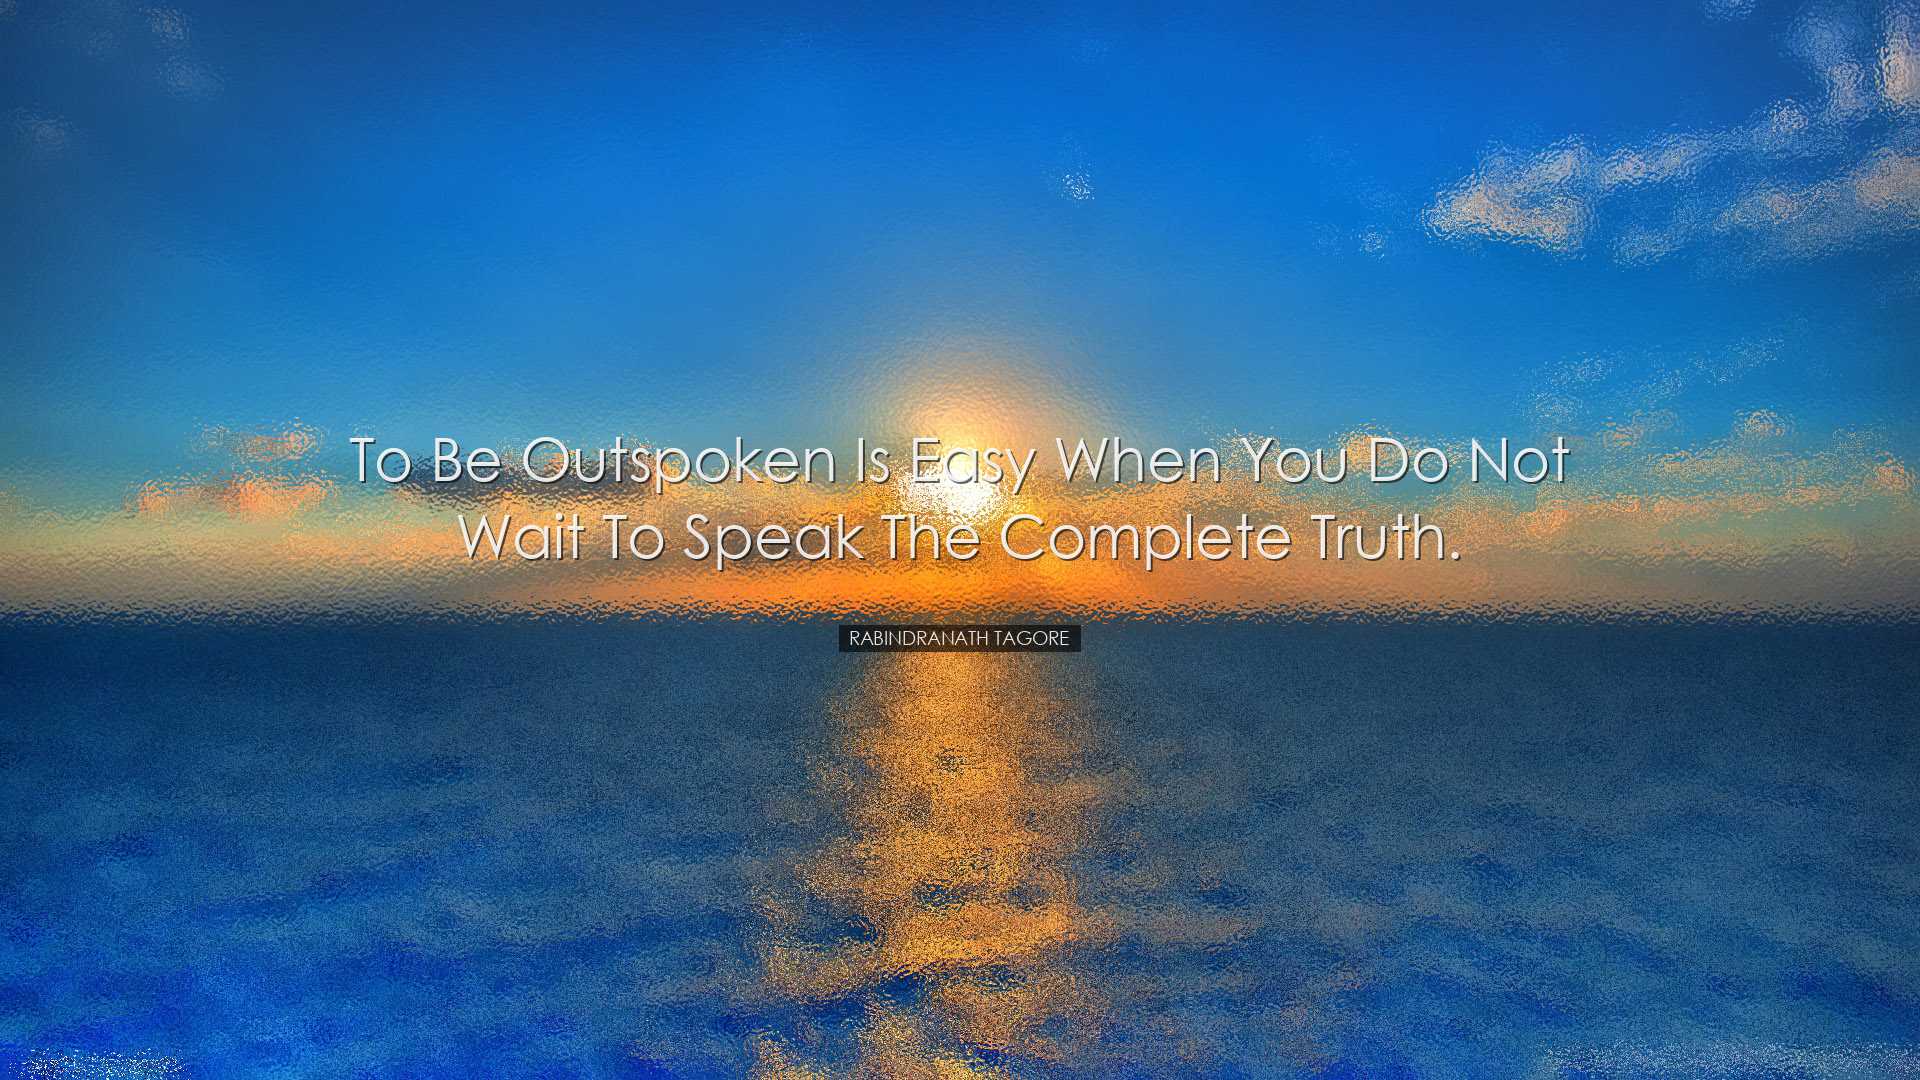 To be outspoken is easy when you do not wait to speak the complete